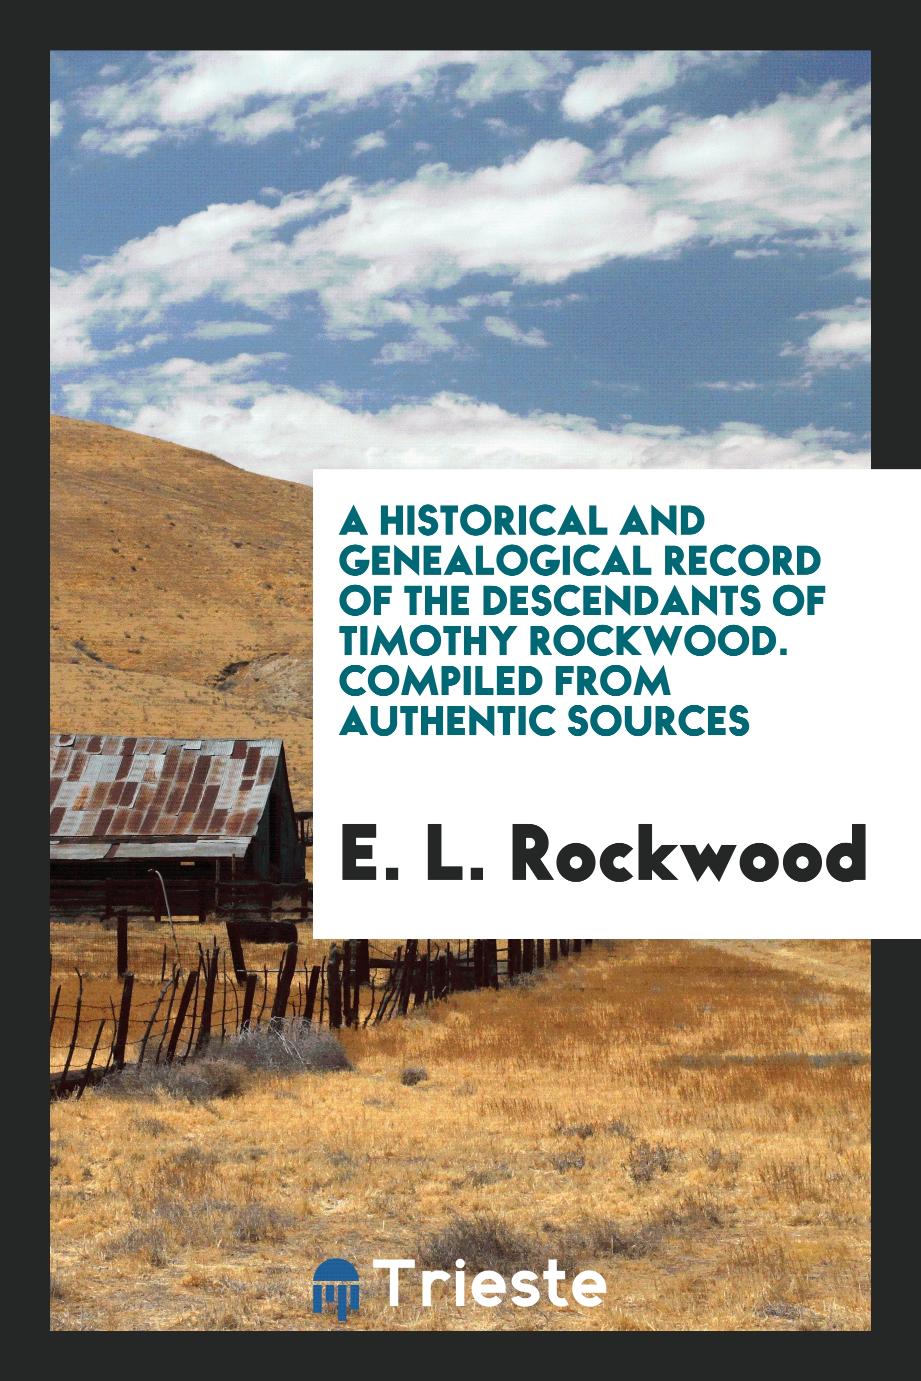 A Historical and Genealogical Record of the Descendants of Timothy Rockwood. Compiled from Authentic Sources